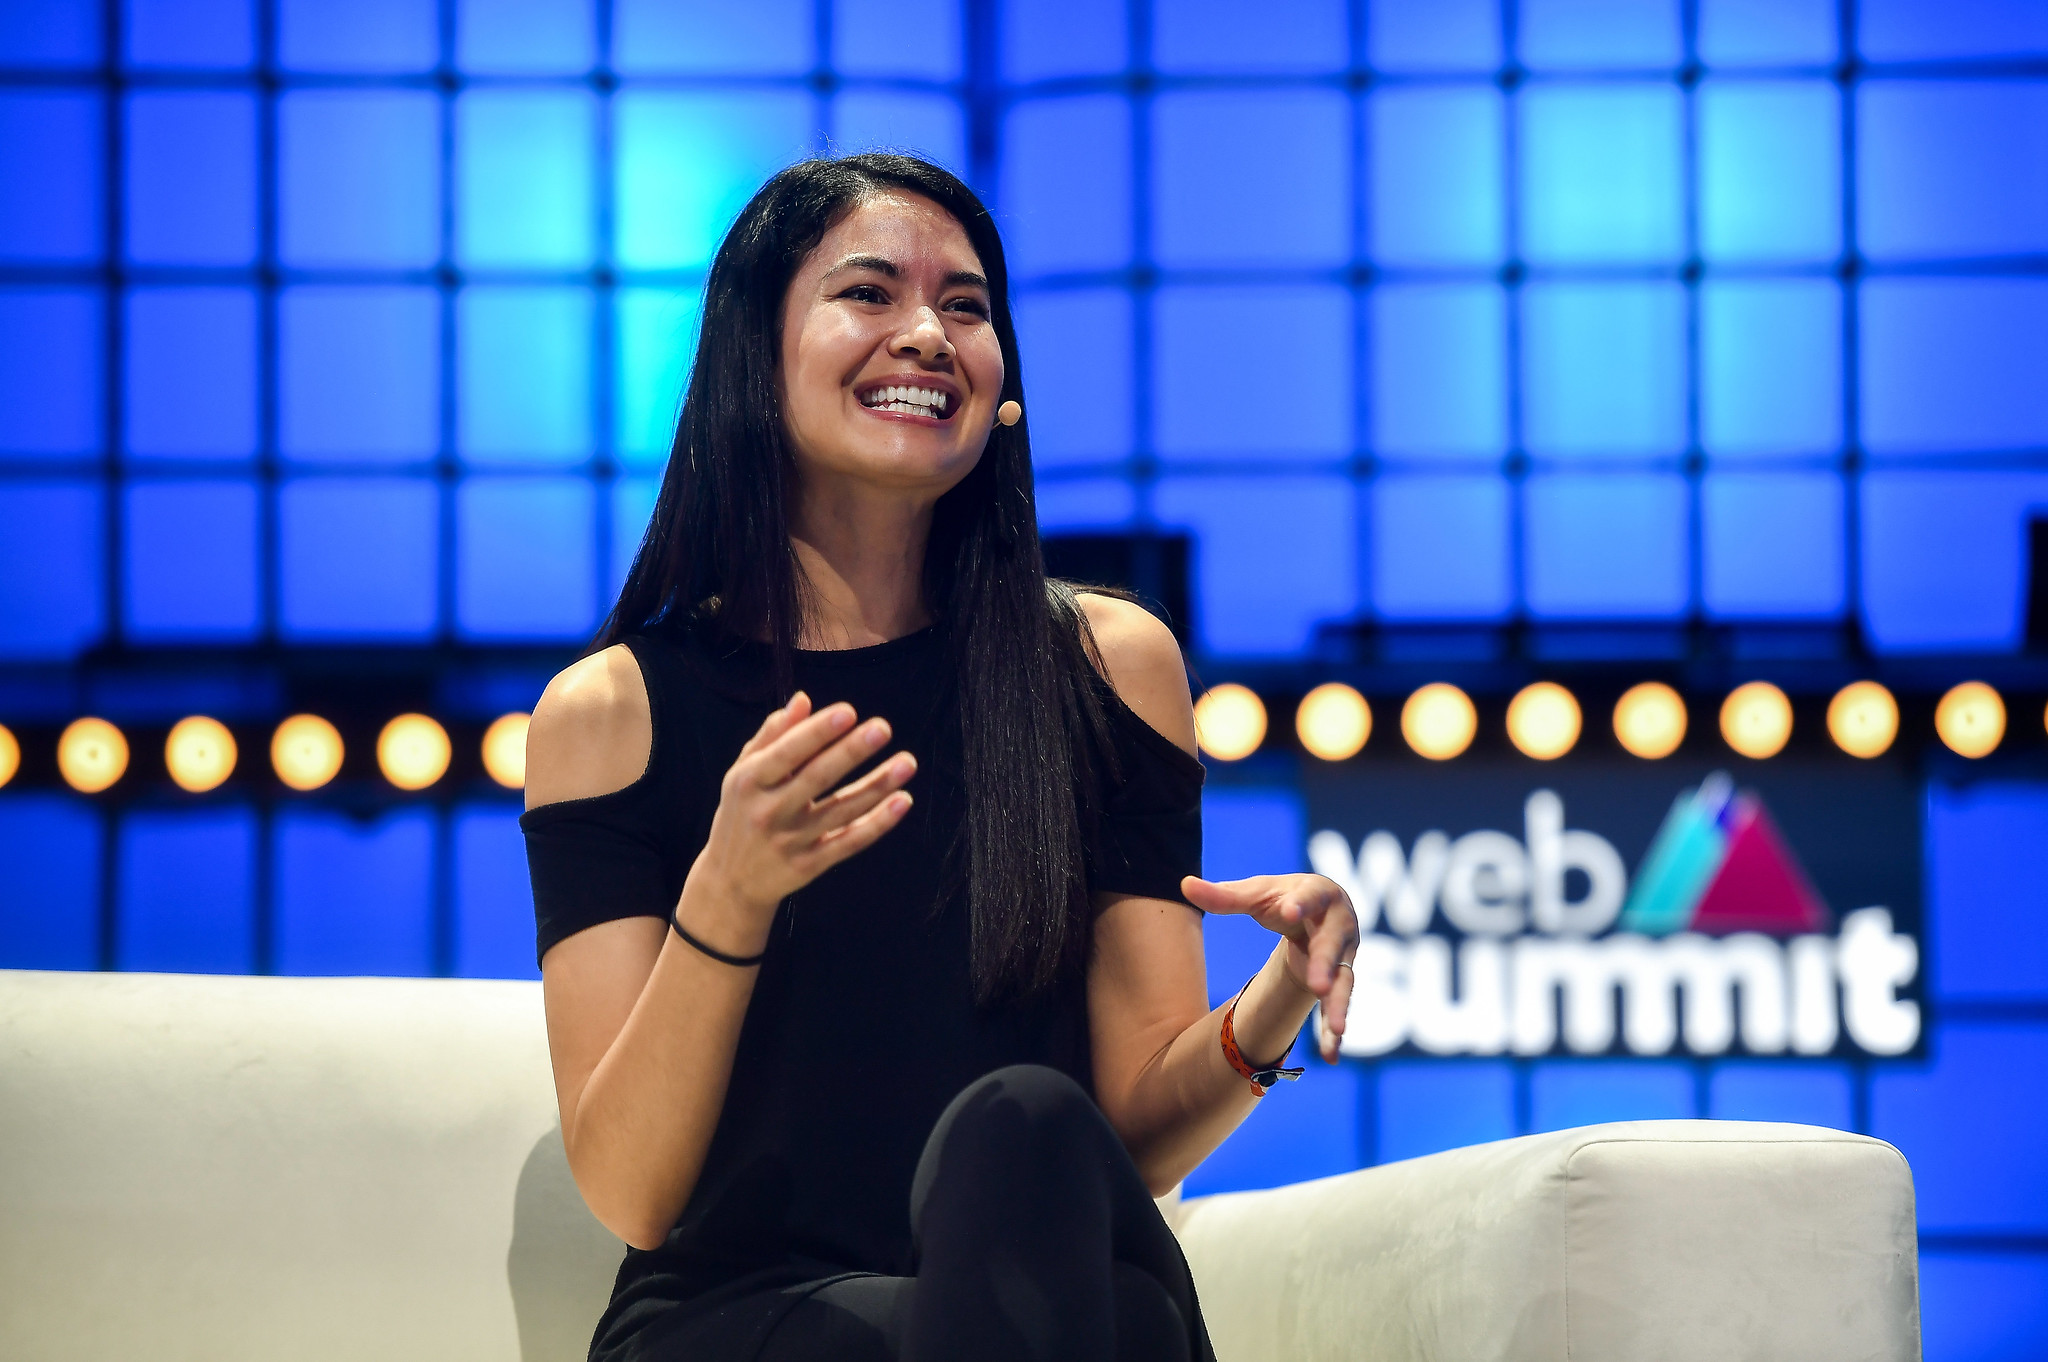 A photograph of Melanie Perkins, co-founder and CEO of Canva, speaking on stage at Web Summit. Melanie is sitting on a chair and appears to be speaking. Melanie is smiling, and wearing an on-ear microphone. The Web Summit logo is visible in the background.